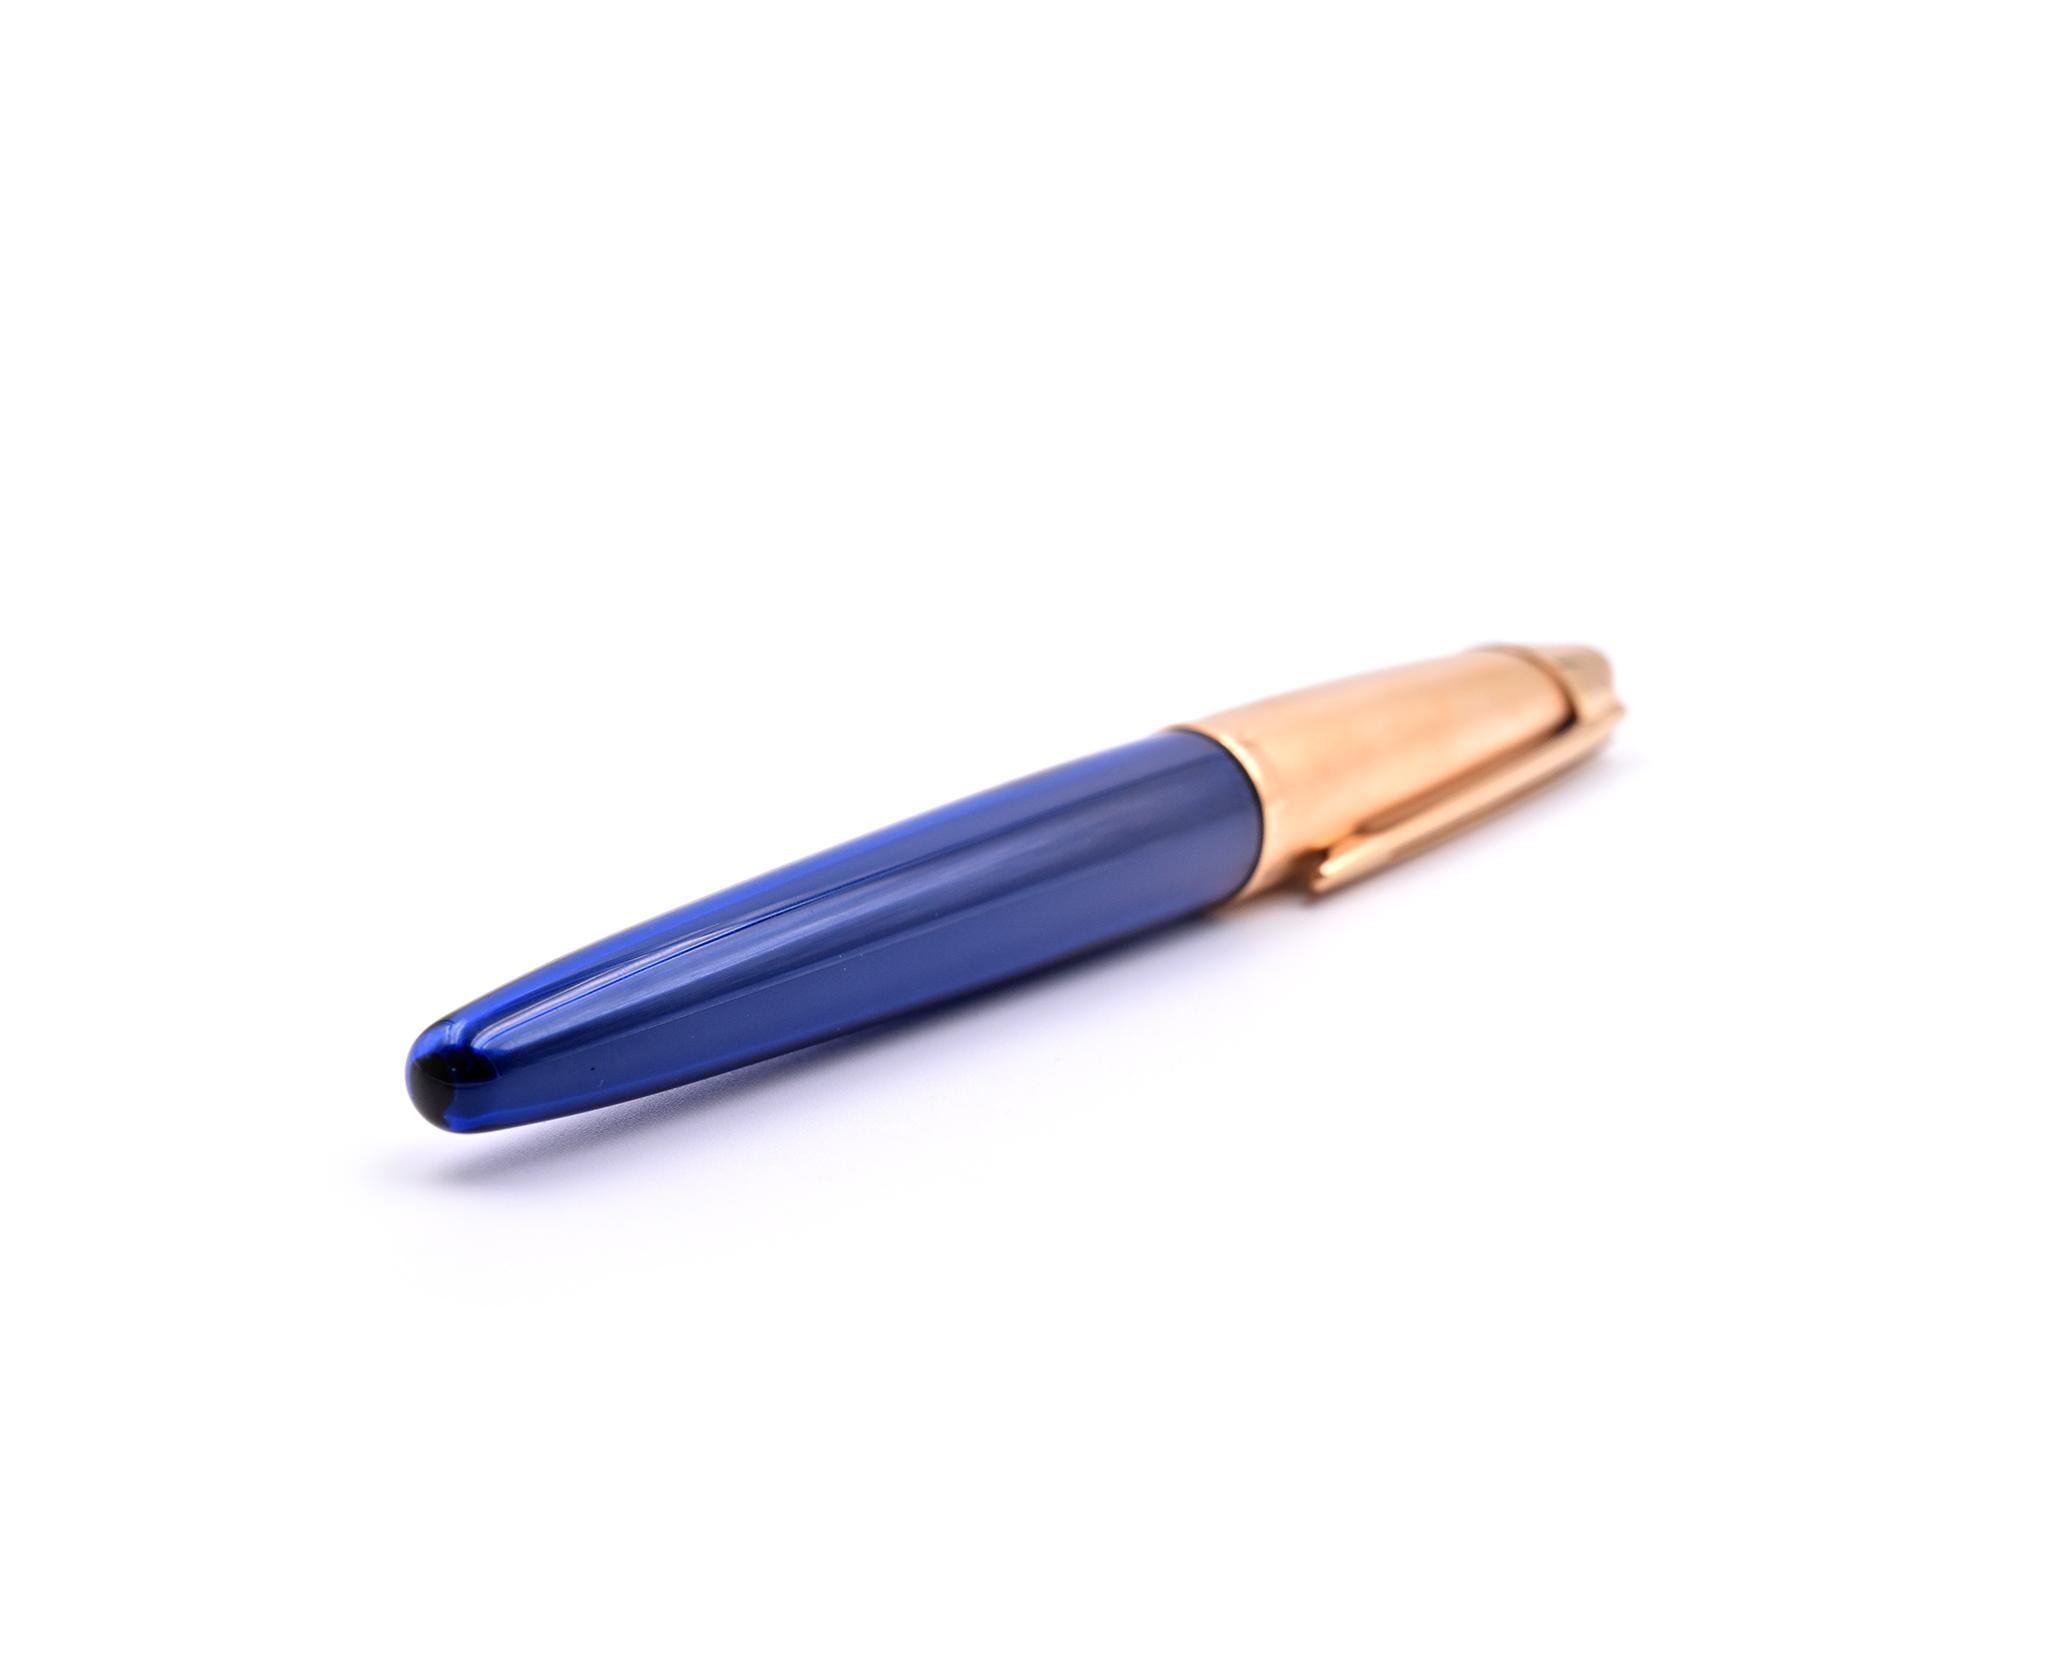 Designer: Waterman Paris
Dimensions: pen measures 6-inches long
Weight: 50.07 grams

Comes with Box and Paperwork.
